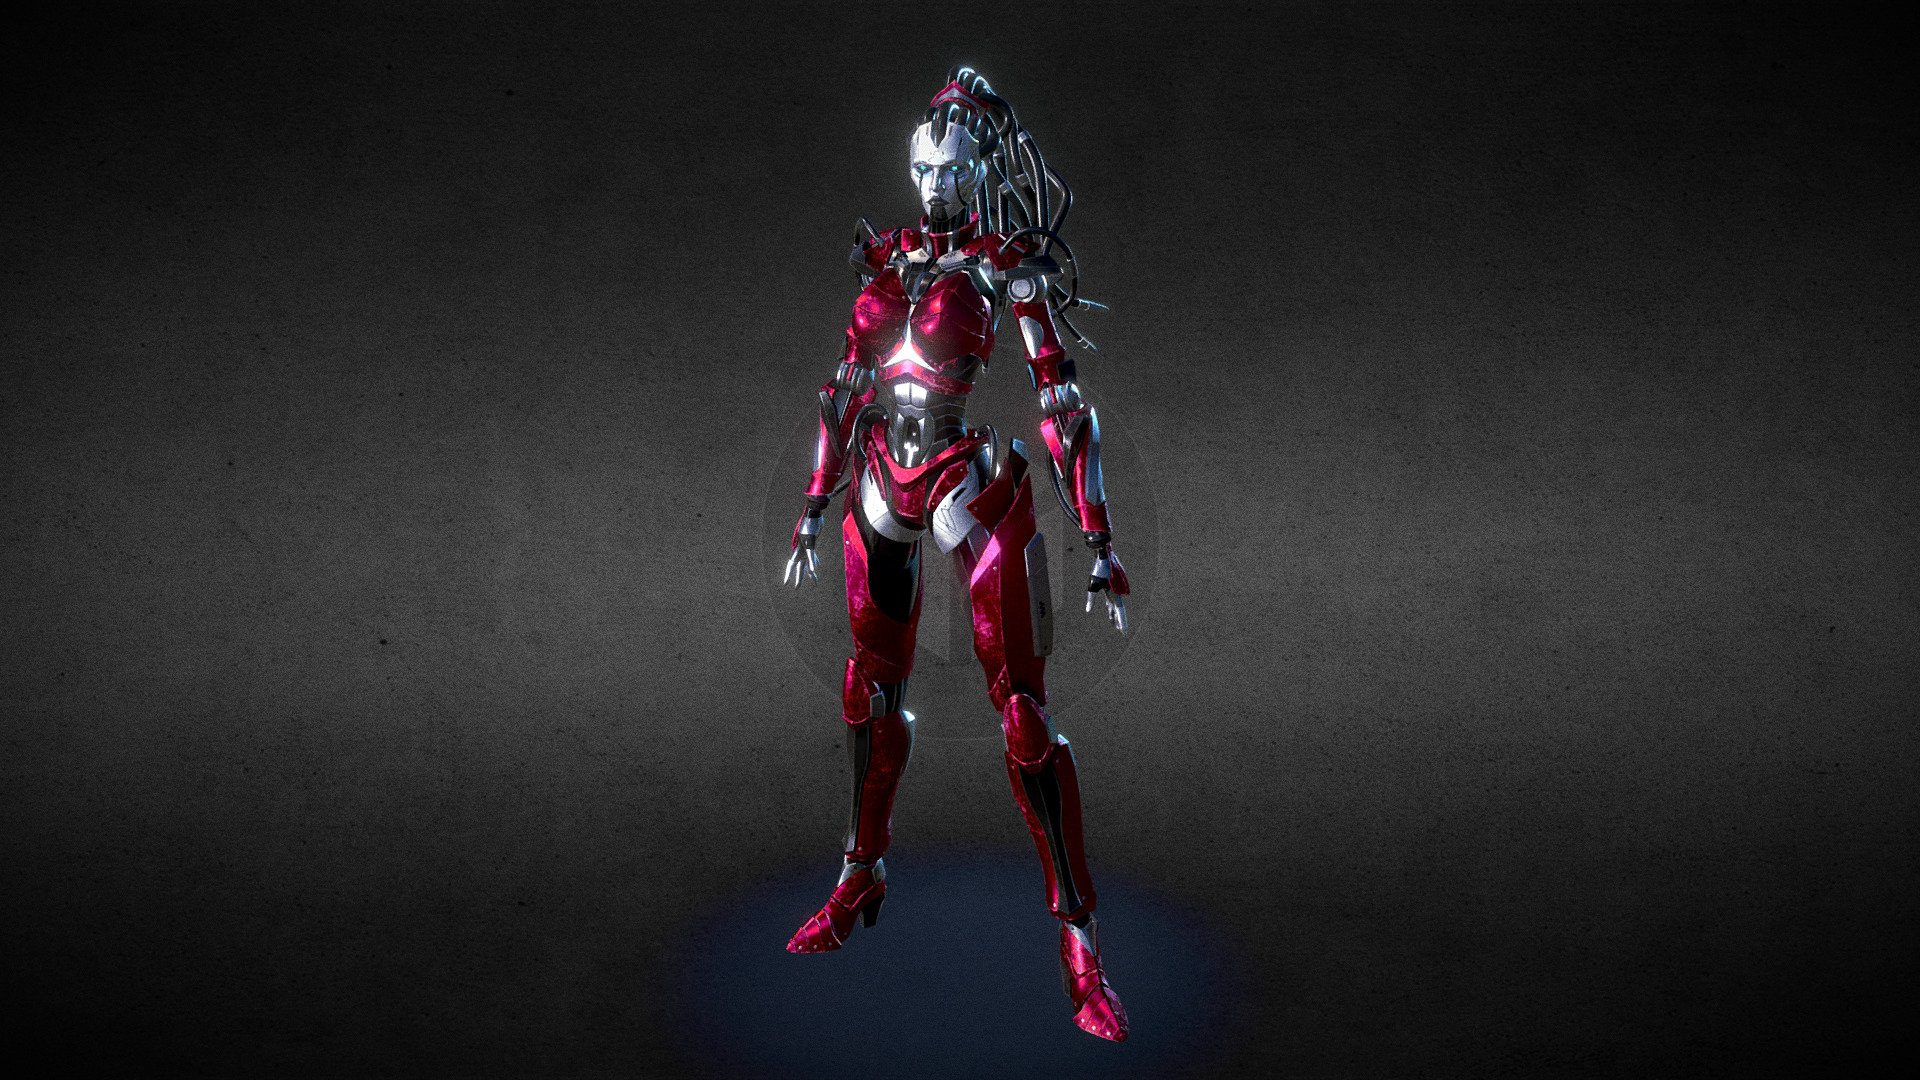 Custom designed female robot character, themed with android queen aesthetic.Suitable for games and subdivision-ready for films or close up. Comes with full rig in Blender file. PBR textures in 4K quality.

&mdash;DETAILS&mdash;

In this package includes:





Blender file (.BLEND) with rigs and IK controllers.




PBR textures in 4K, including maps: Color, Metallic, Specular, Roughness, Emission.




OBJ and FBX files.



Base poly count: 32.106 polys, 32.945 verts, 62.858 tris

The model in Blender project file also completed with Crease edges and therefor, subdivision ready.

Thank you for your support of my products and look out for more soon 3d model